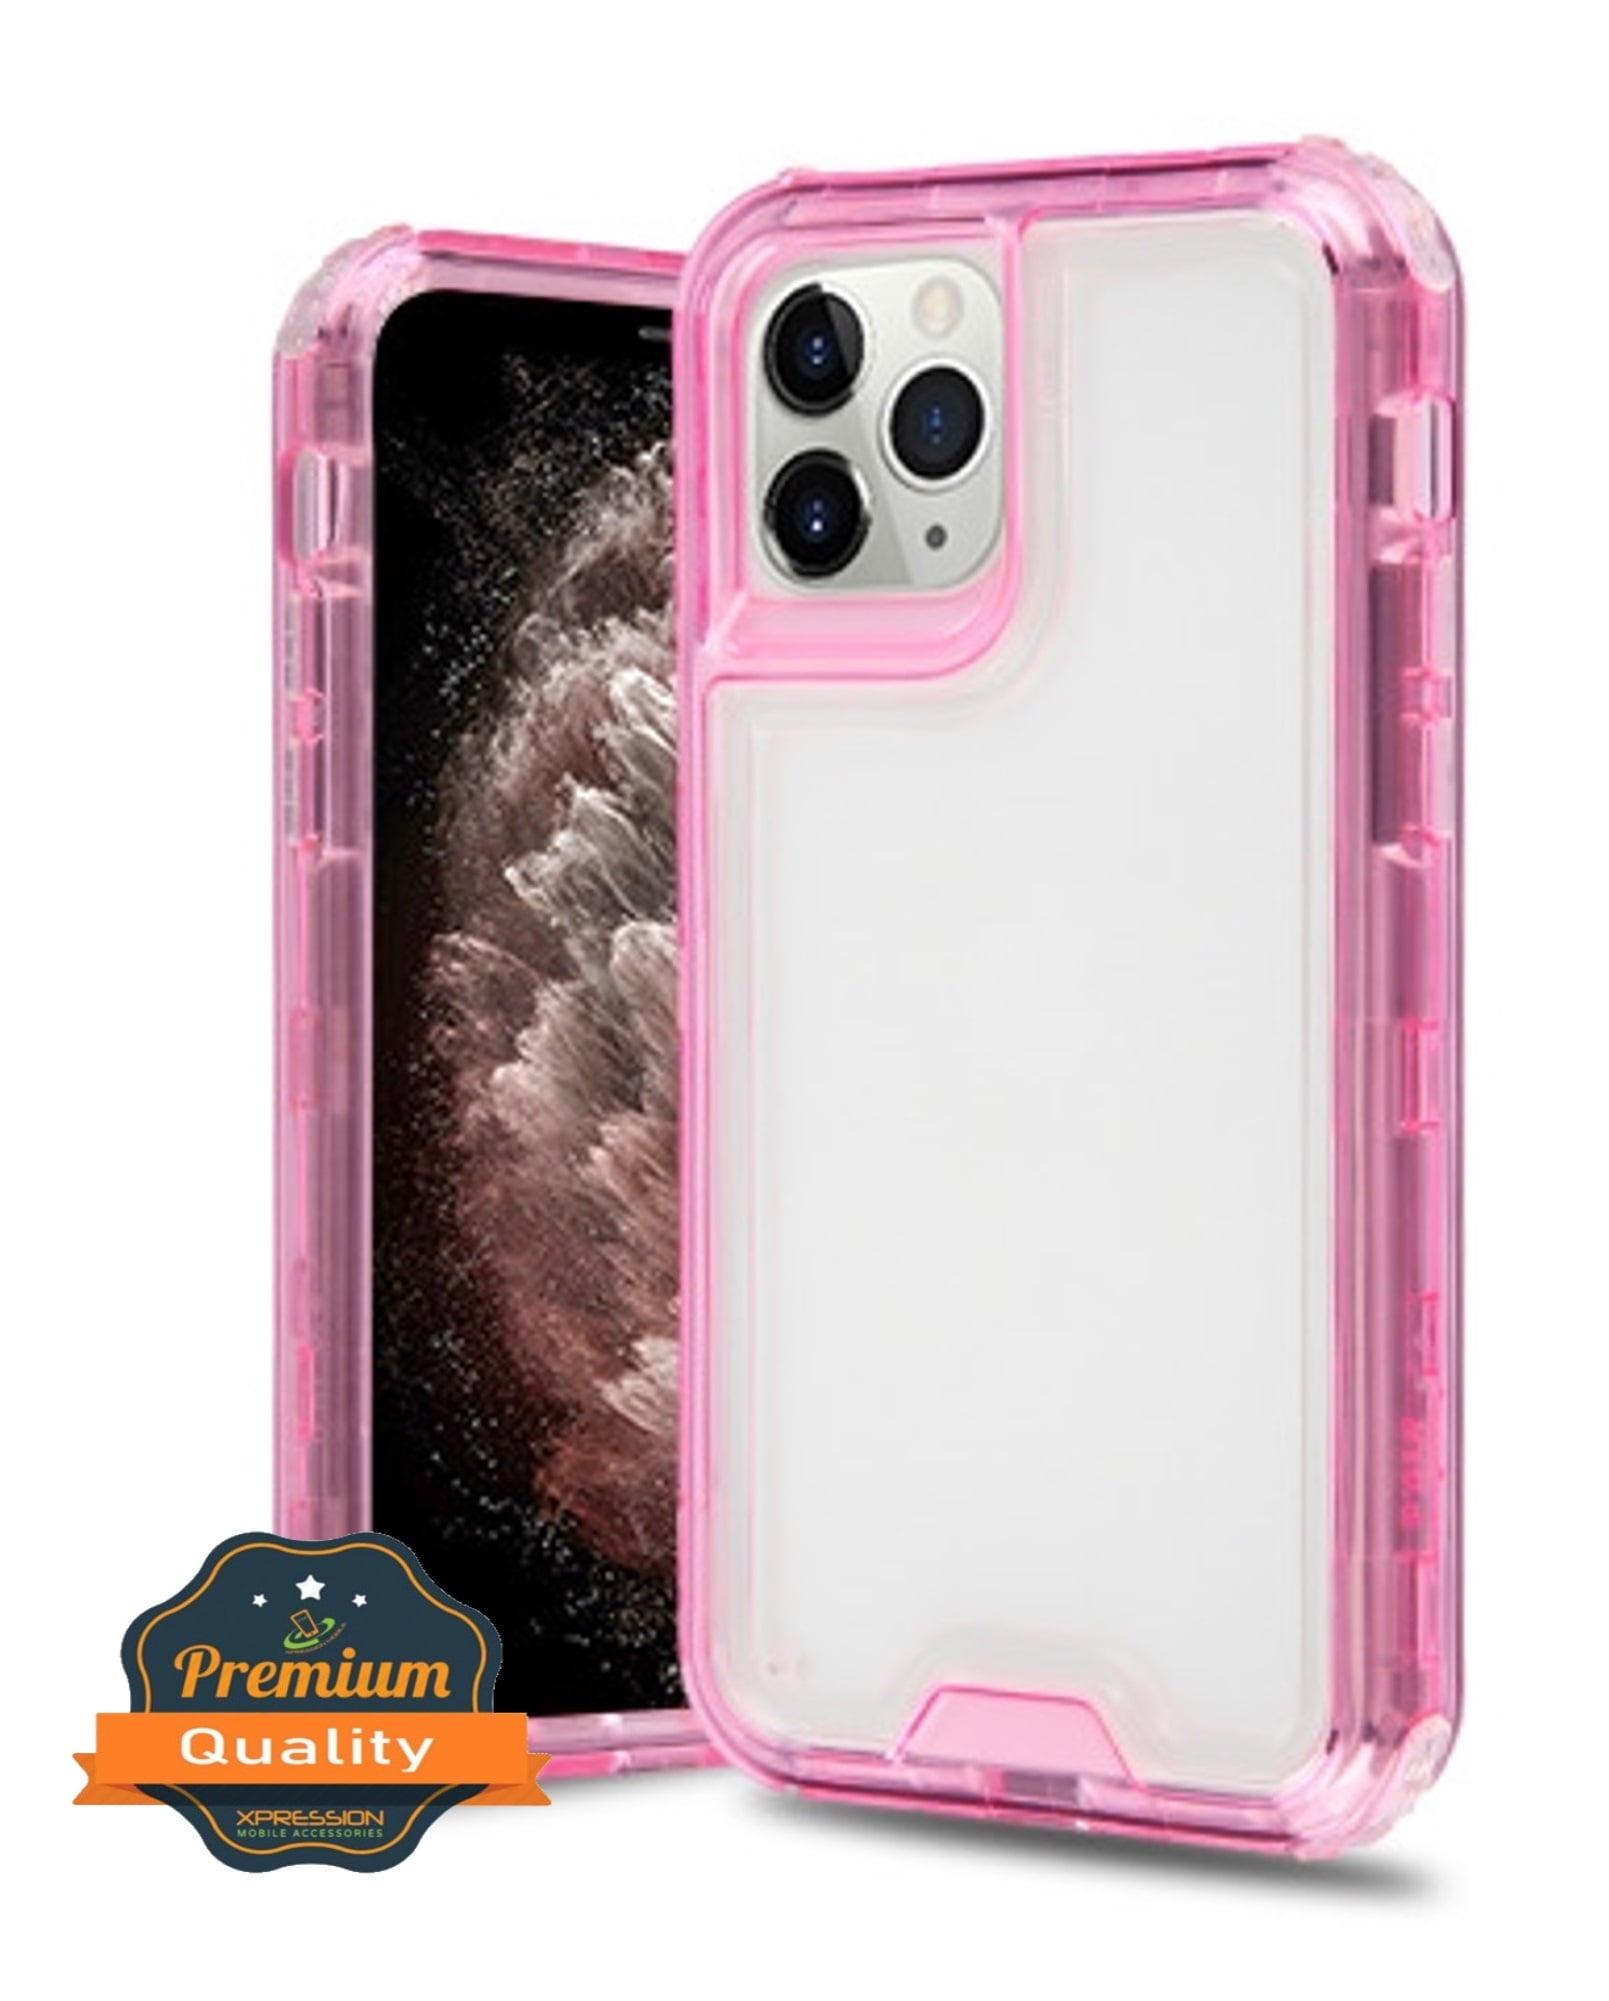 Compatible with iPhone 11 Pro max case Trunk Box Durable Luxury Glitter  Girly Cover Bumper fundas 6.5 inch (Pink)